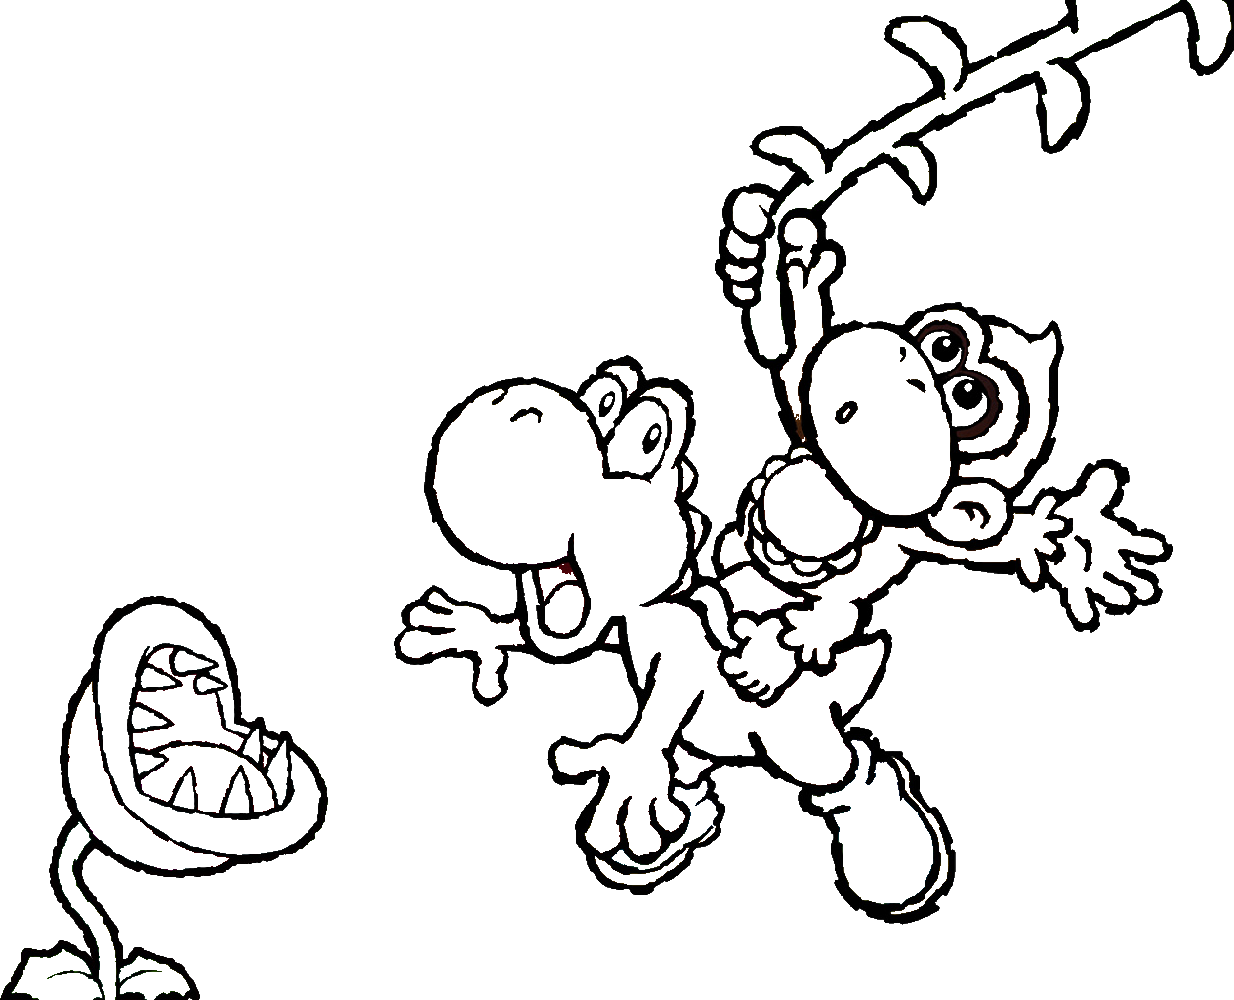 yoshi coloring pages yoshi and monkey